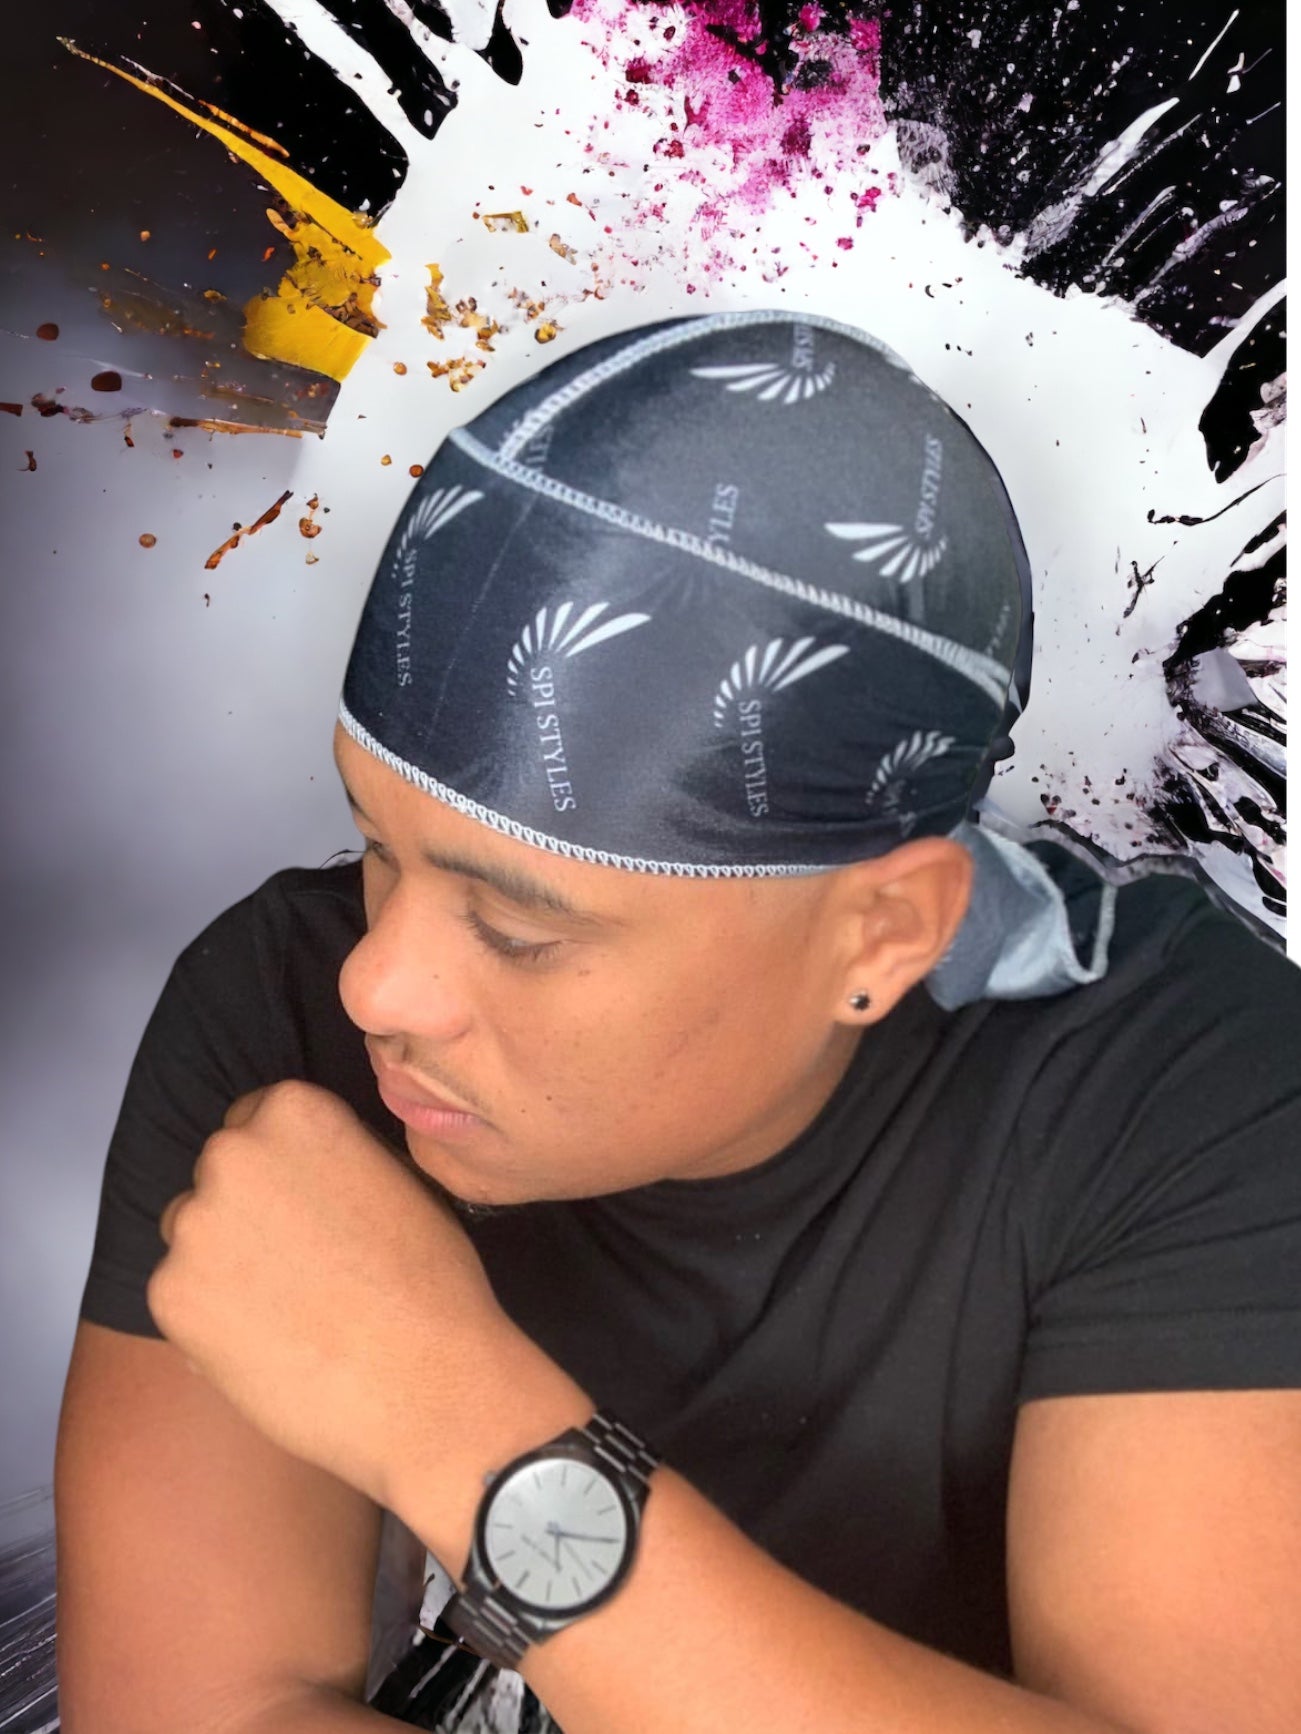 54 Pieces Silk Durags for Men Women 18 Colors Durags Wave Cap Satin Durags  for 360 Waves Breathable Doo Rags with Wide Strap Durags for Hair Waves